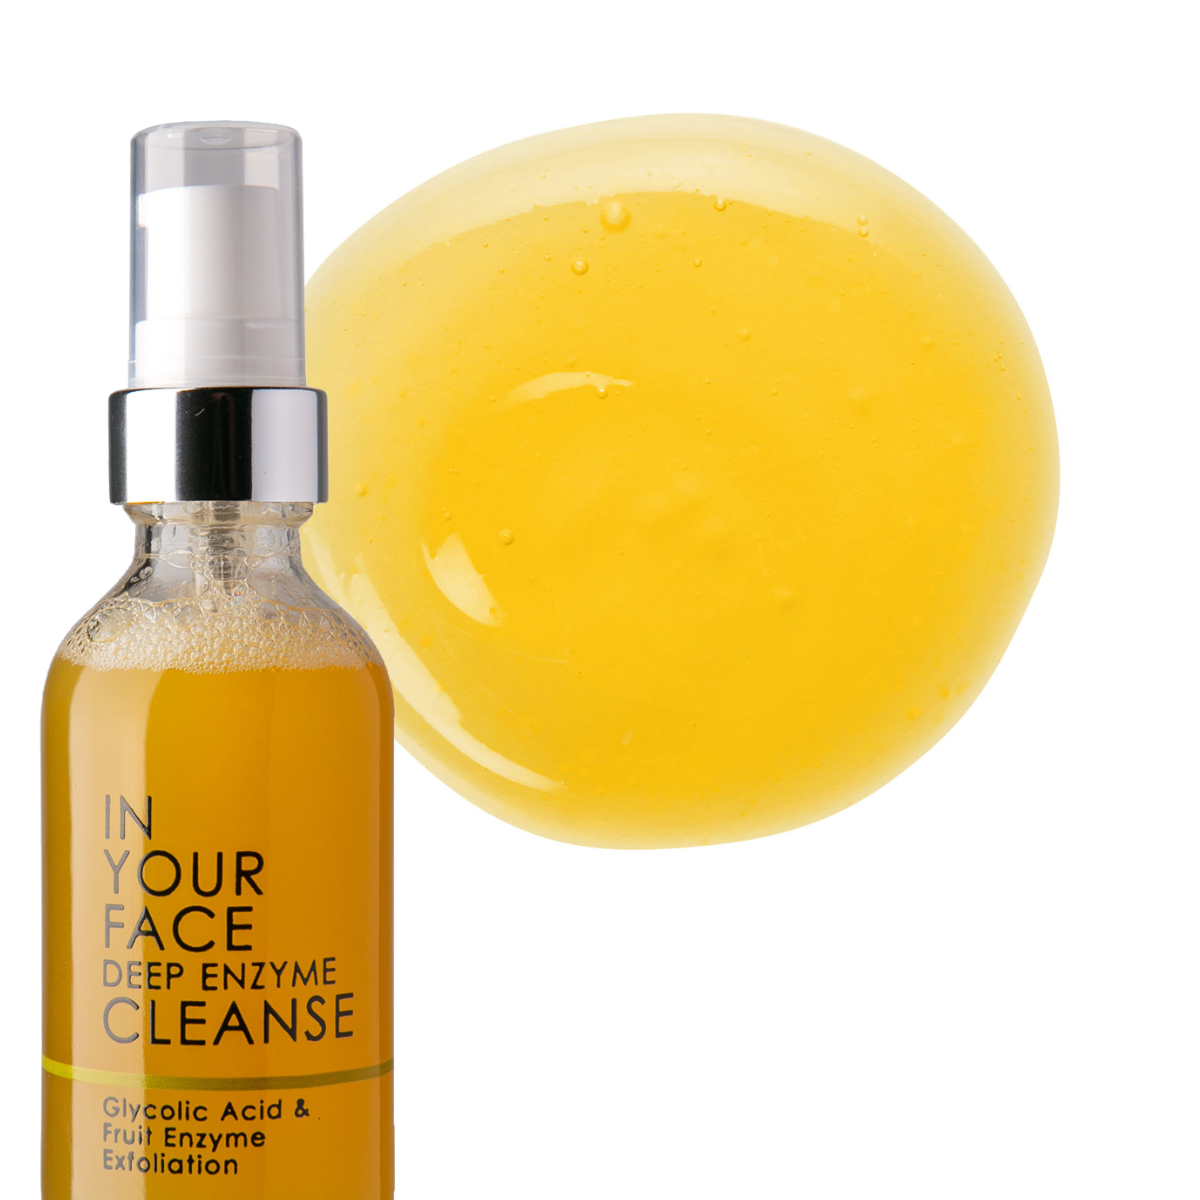 a bottle of IN YOUR FACE DEEP ENZYME CLEANSE on a white background. The bottle also says "Glycolic Acid & Fruit Enzyme Exfoliation". It's with a pump dispenser and the product inside is an orange color. Next to the bottle is a dollop of the product and it is an orange color with a couple small bubbles.